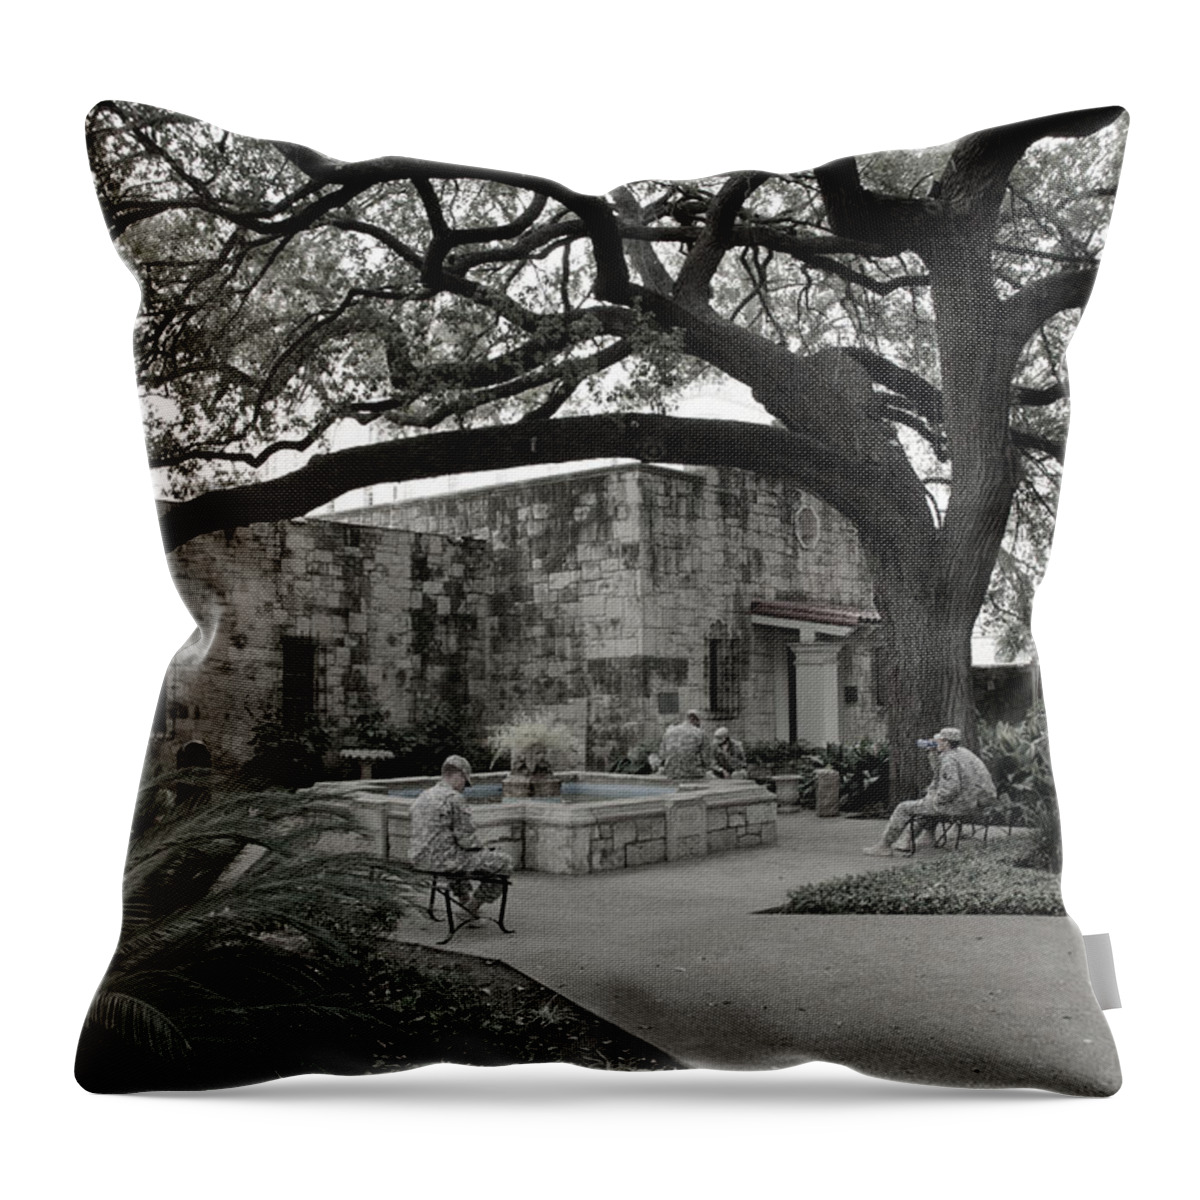 Soldiers Throw Pillow featuring the photograph The Alamo by Kathy Paynter